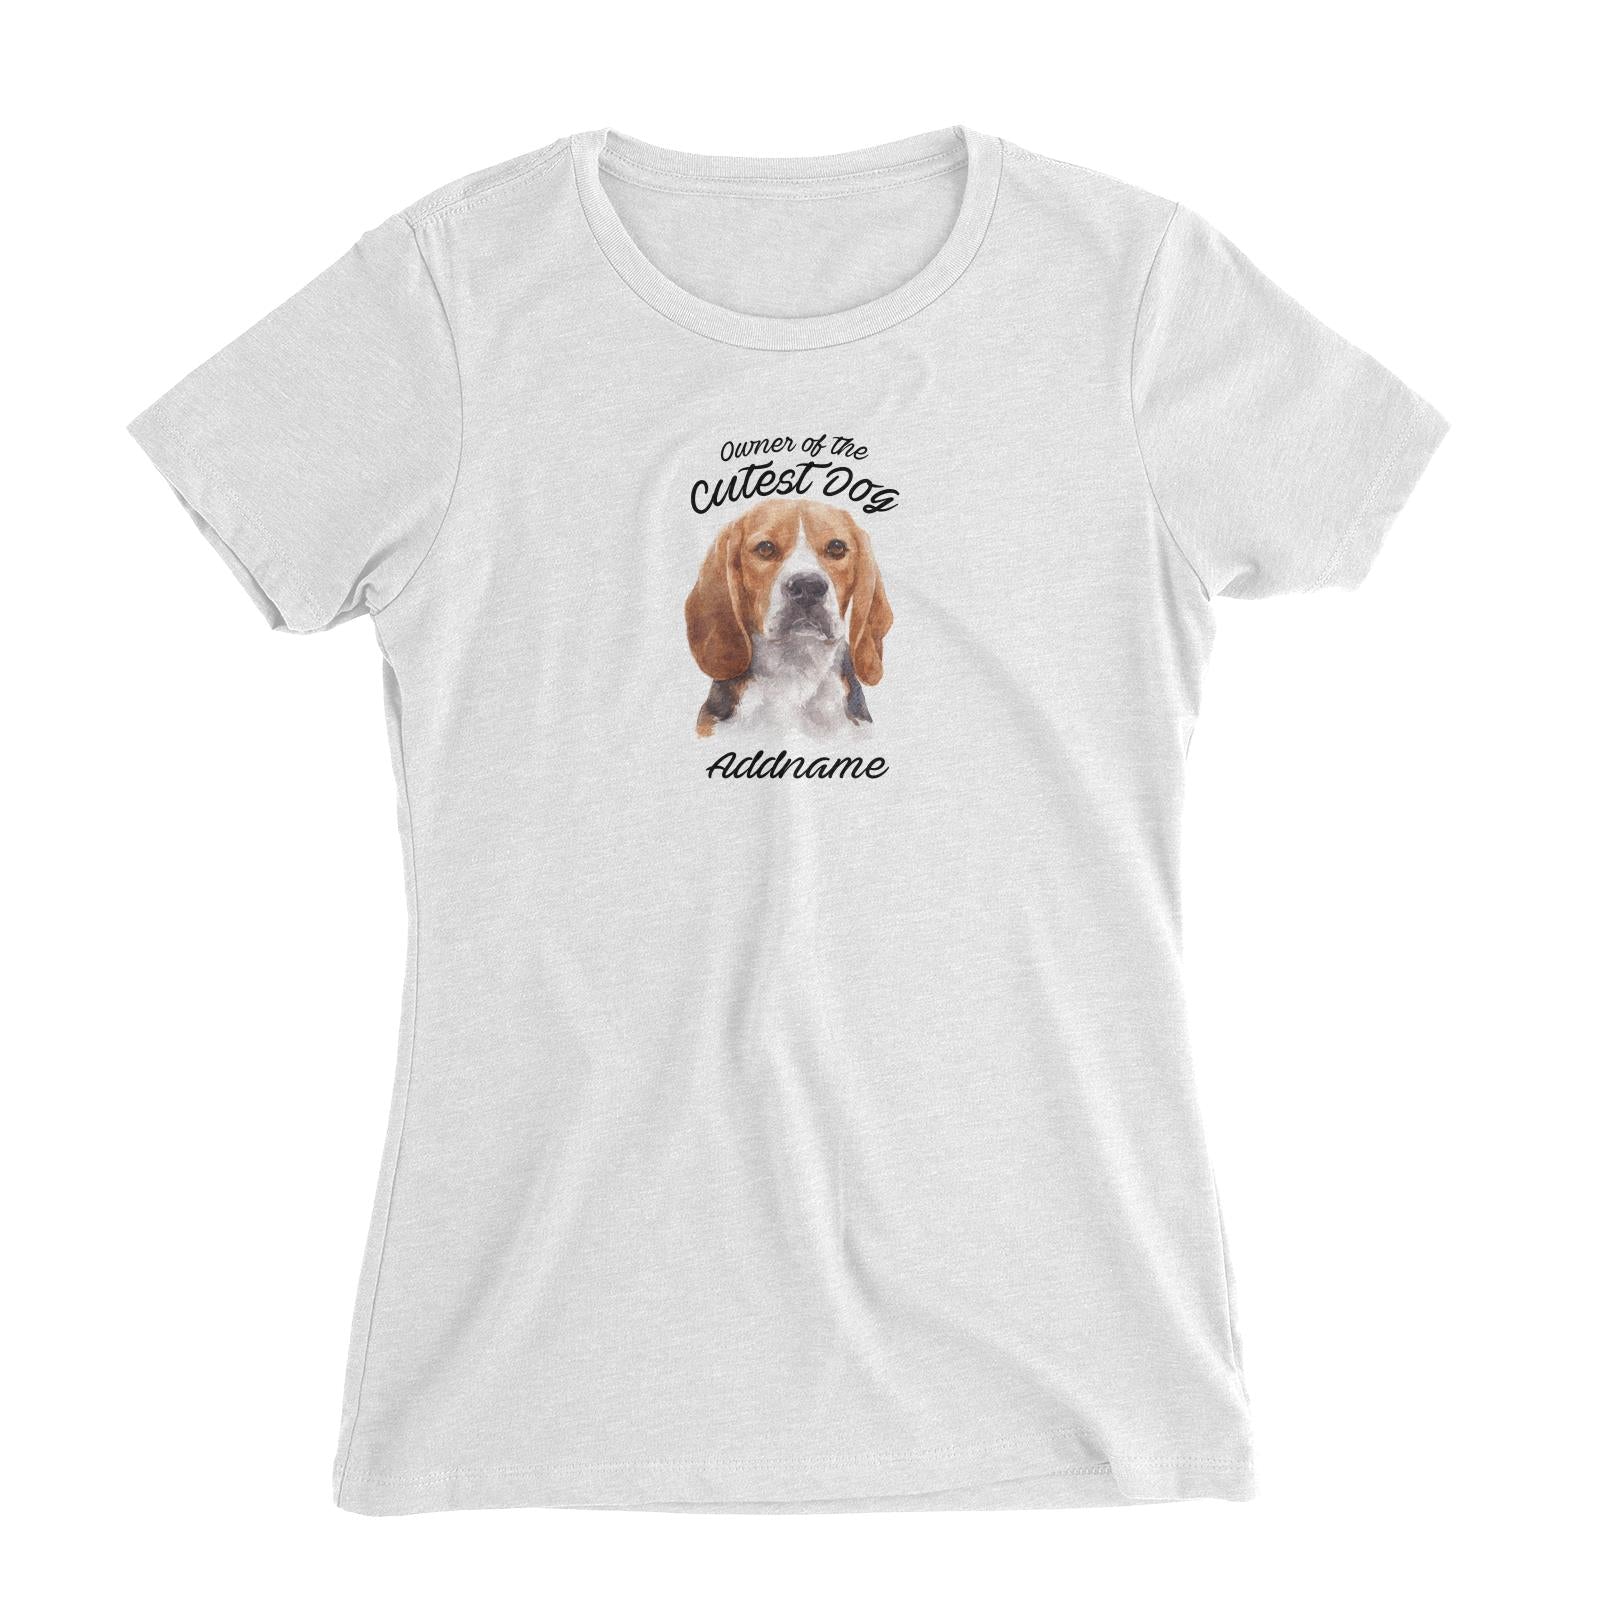 Watercolor Dog Owner Of The Dog Beagle Frown Addname Women's Slim Fit T-Shirt